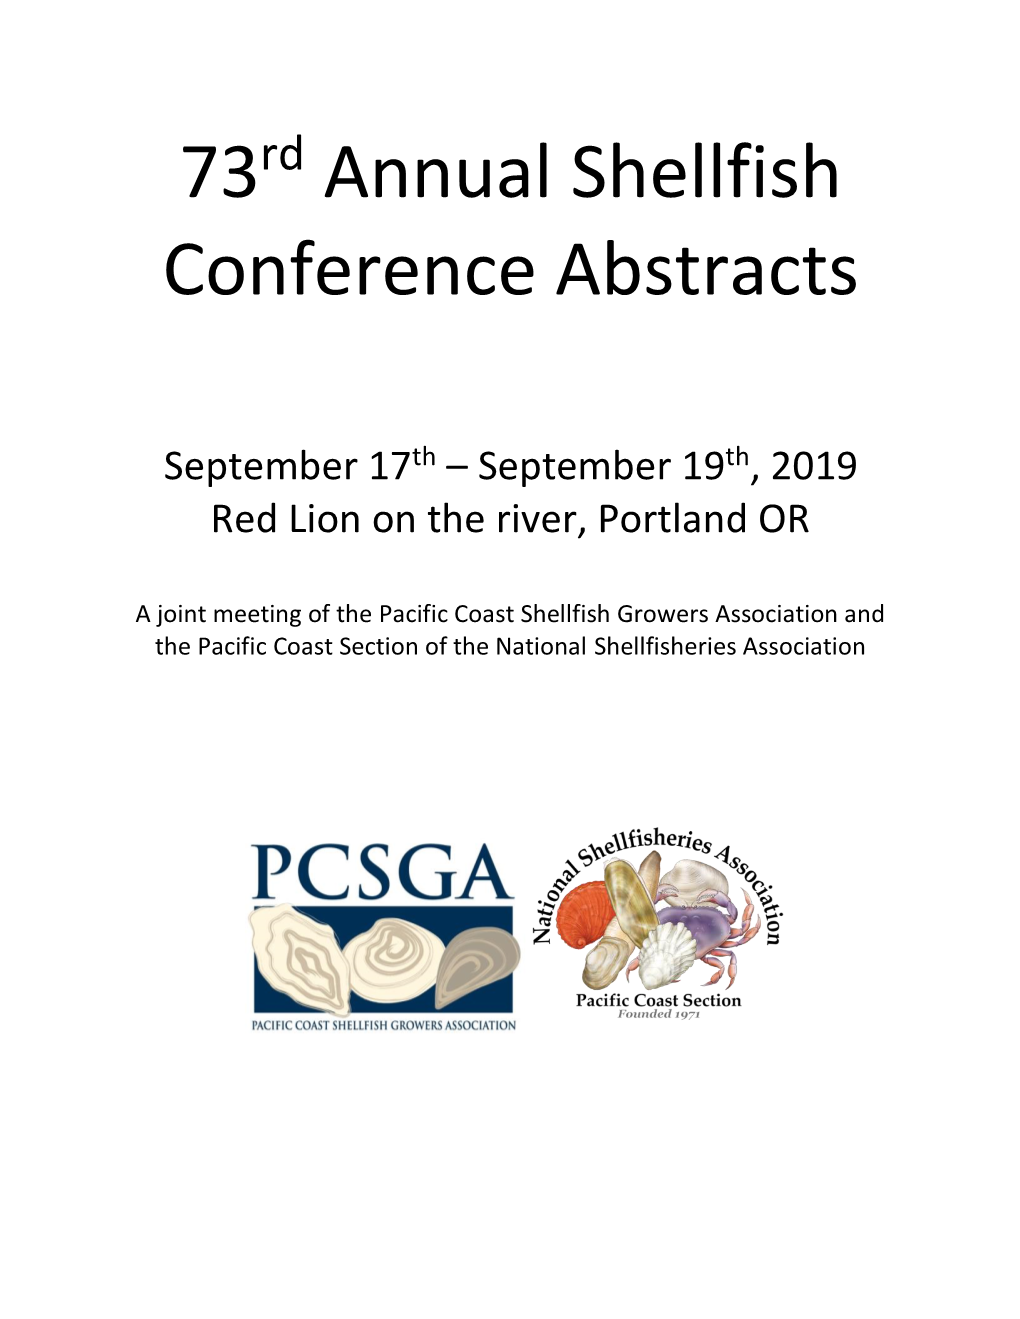 73 Annual Shellfish Conference Abstracts